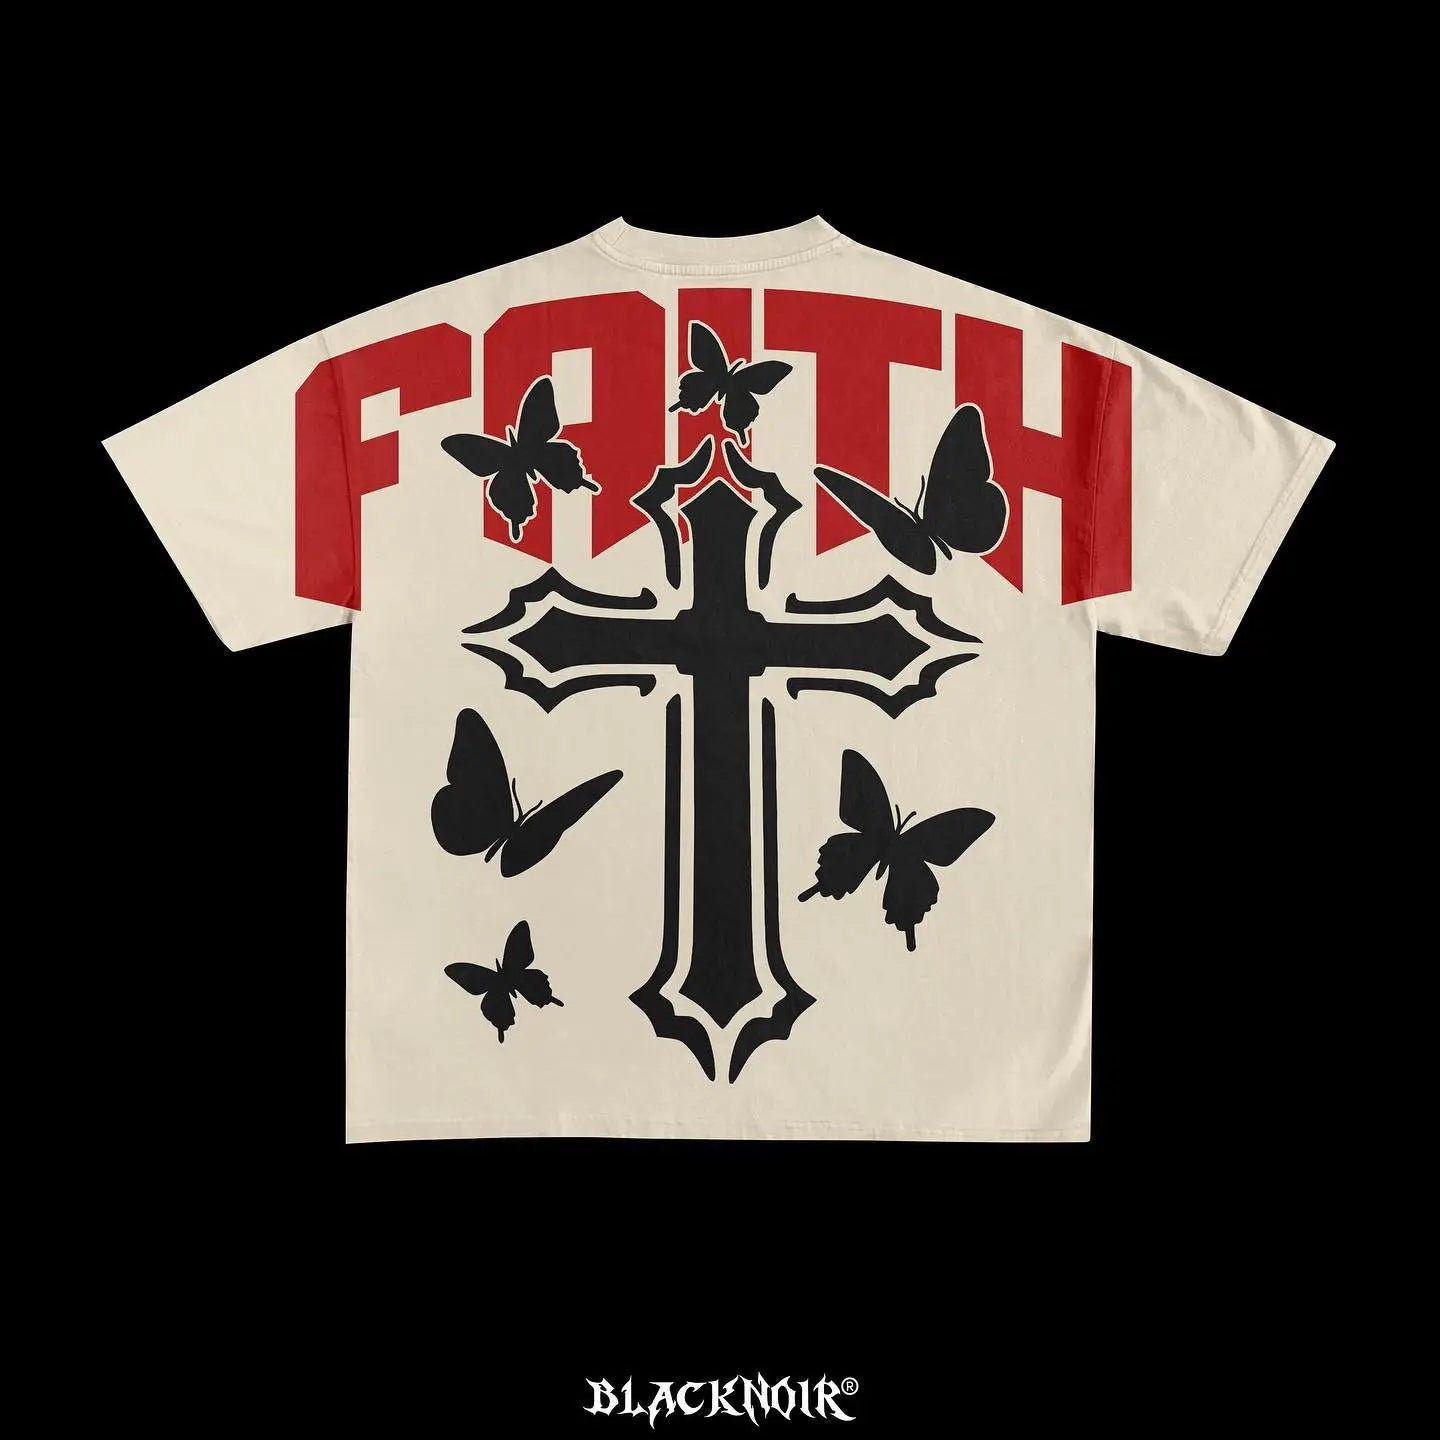 A beige, oversized T-shirt made of high-quality cotton features the word "FAITH" in large red letters, a black cross, and several black butterflies. The text "BLACKNOIR" appears at the bottom, embodying the essence of Maramalive™ Cross butterfly Print graphic t shirts 2023 American y2k tops high quality cotton oversized t shirt goth women clothing.